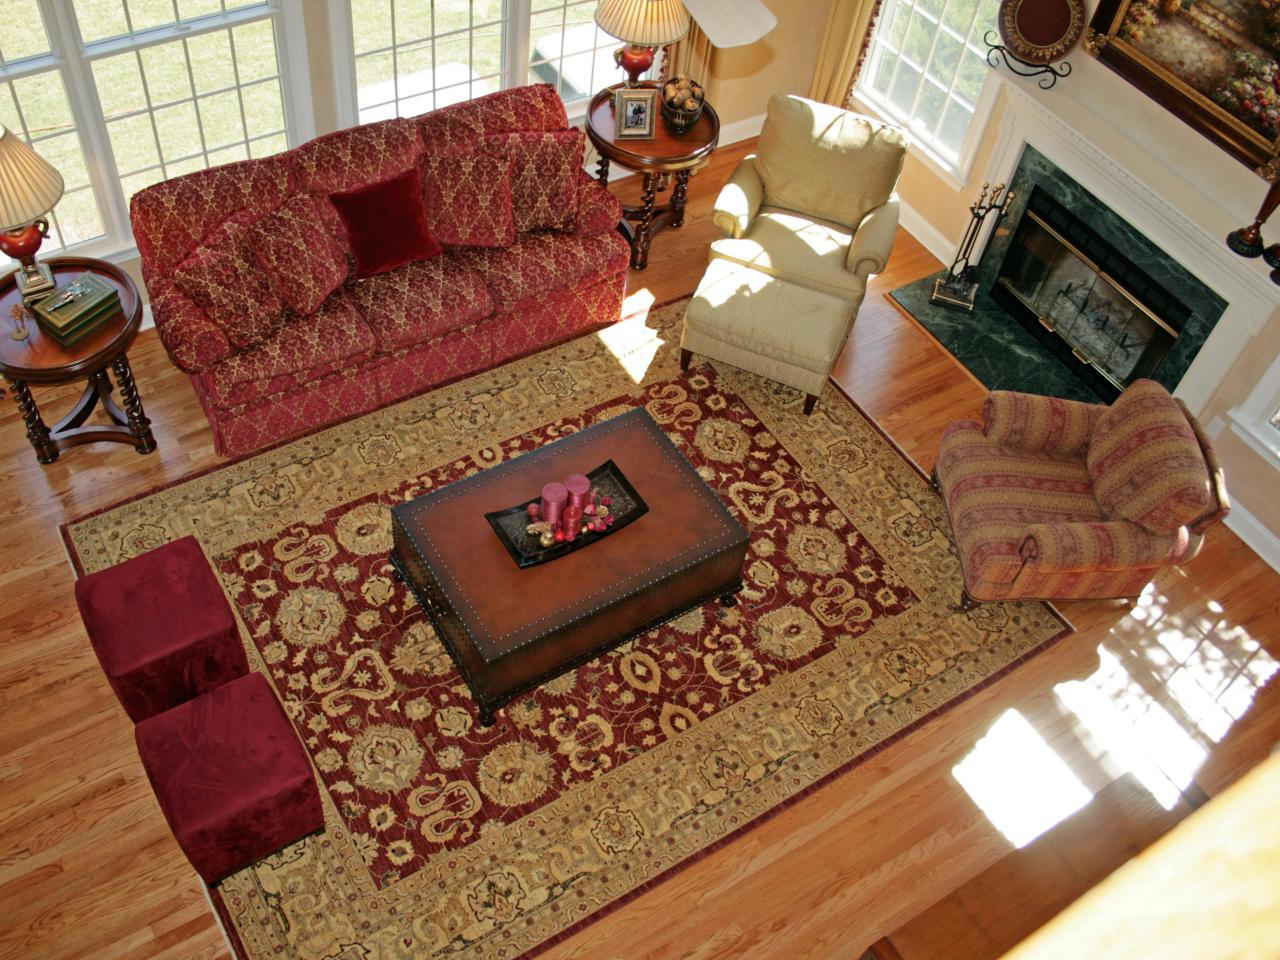 Living Room Pictures With Area Rugs